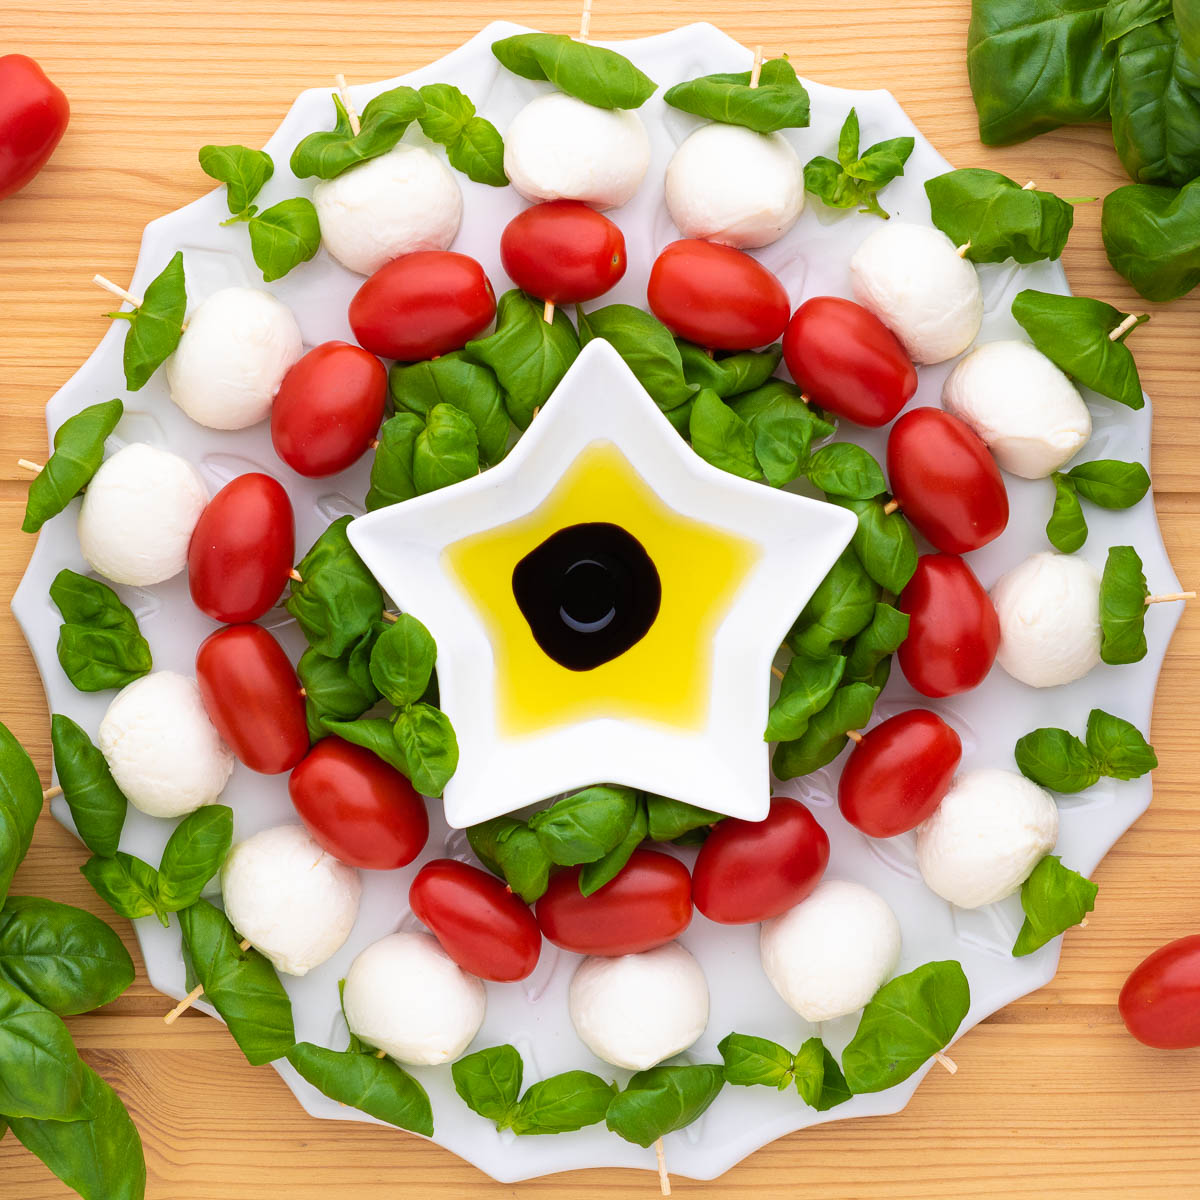 Fresh basil, bocconcini ball, and cherry tomatoes threaded onto wooden skewers and arranged into a circular caprese appetizer wreath.